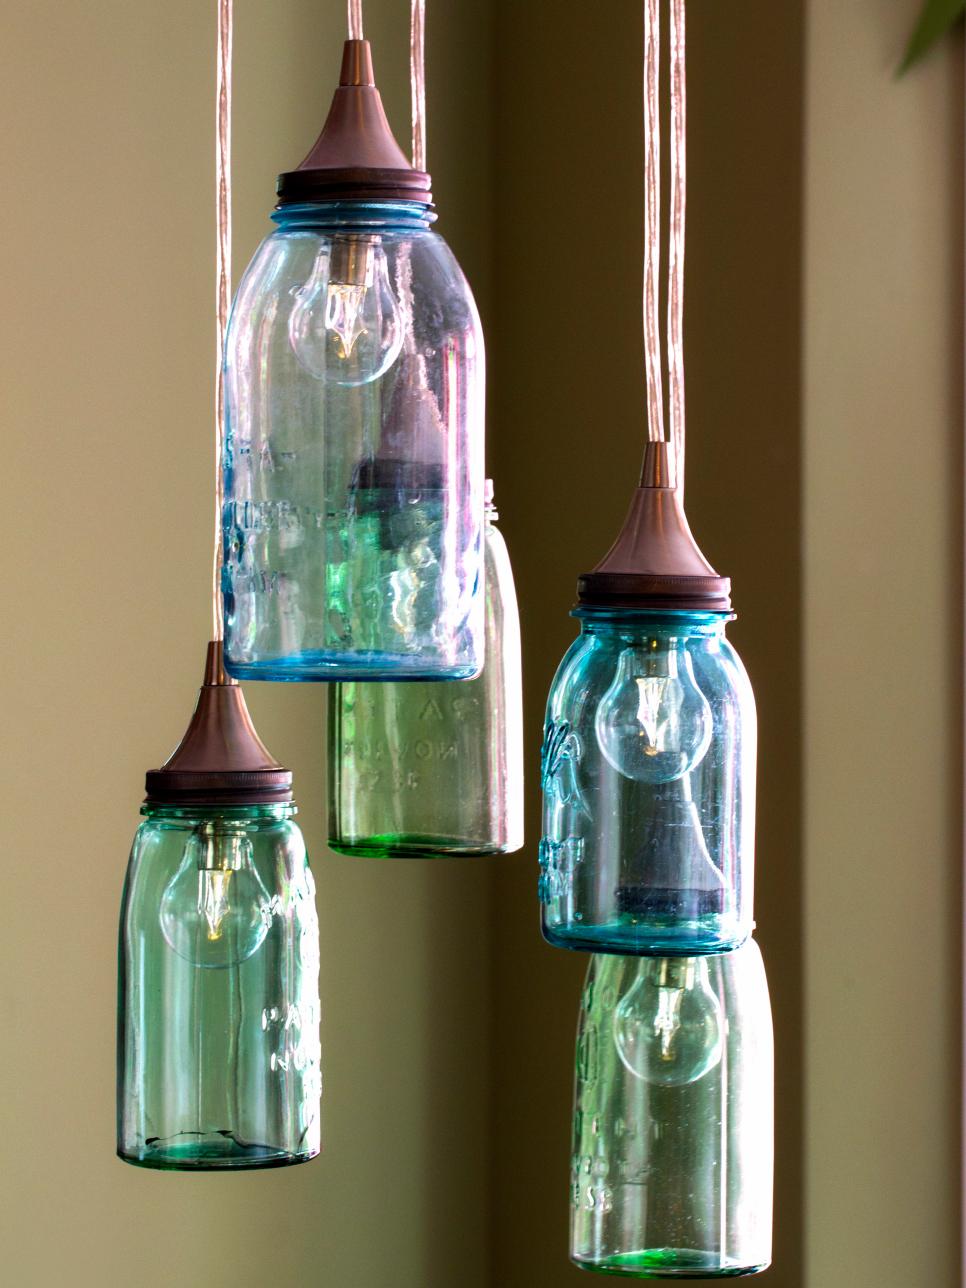 Upcycled Lamps and Lighting Ideas | DIY